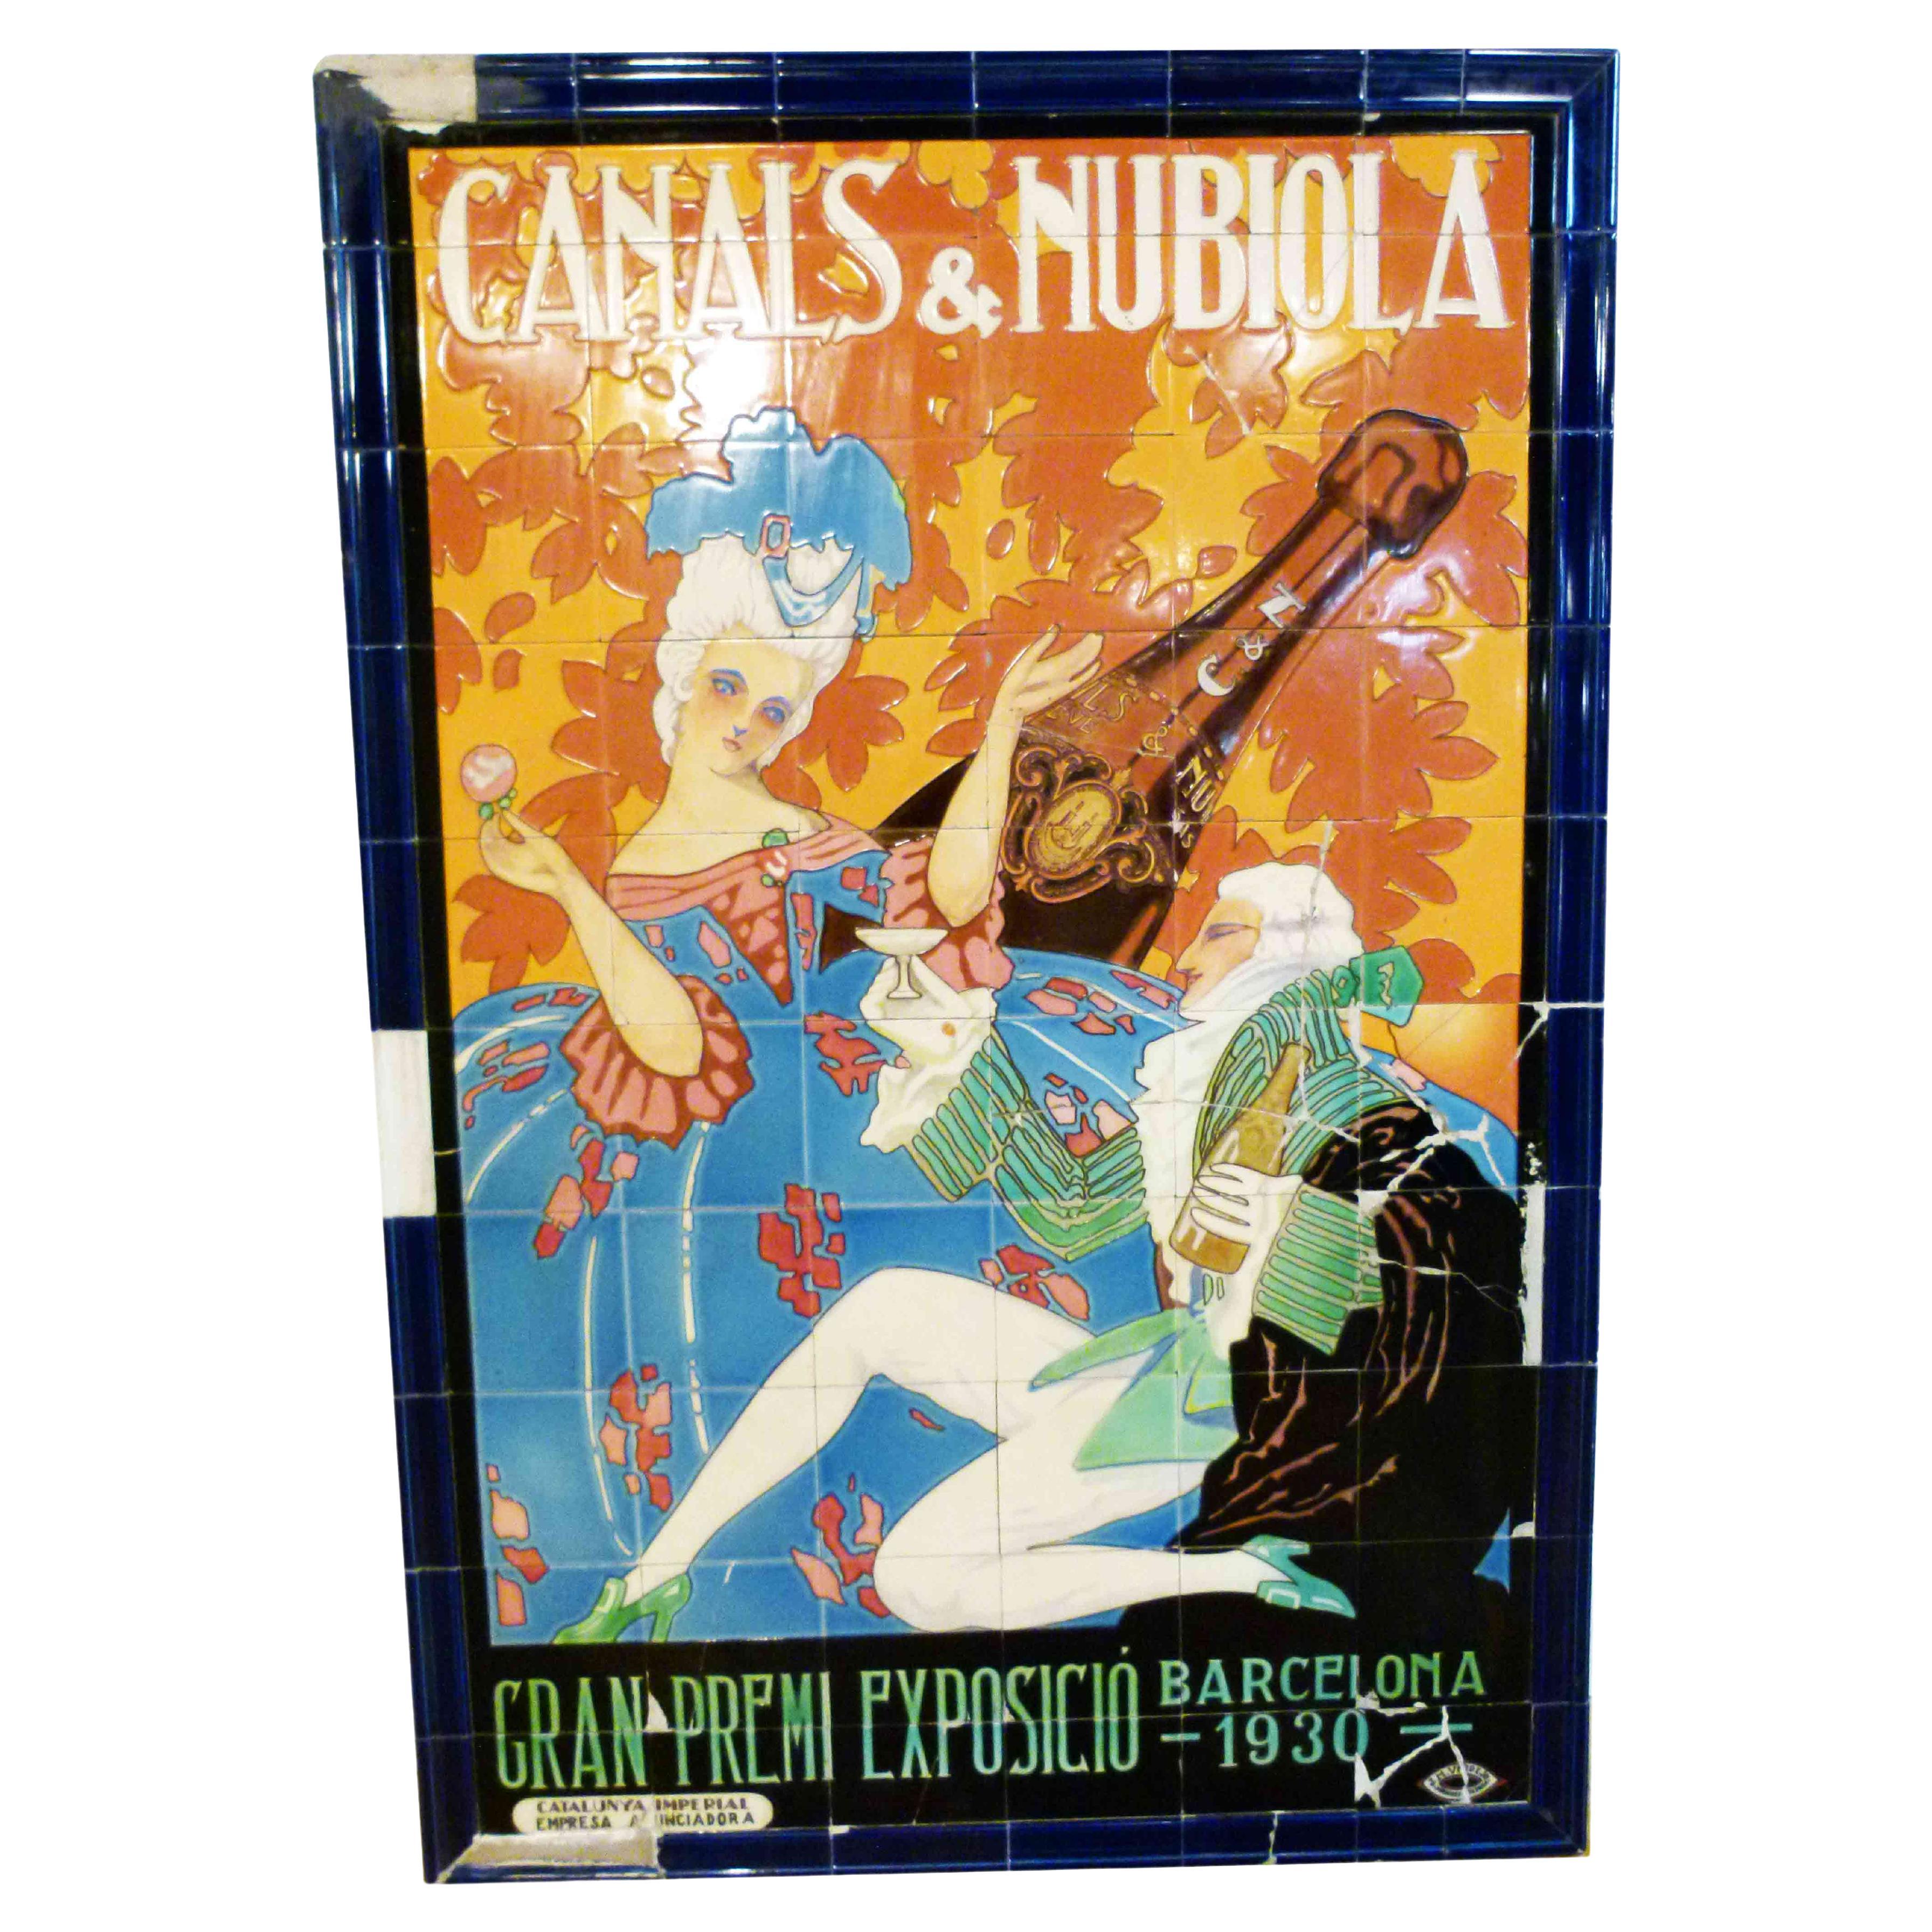 Art Nouveau Advertising Tile Poster from Canals&Nubiola's Wine Cellar